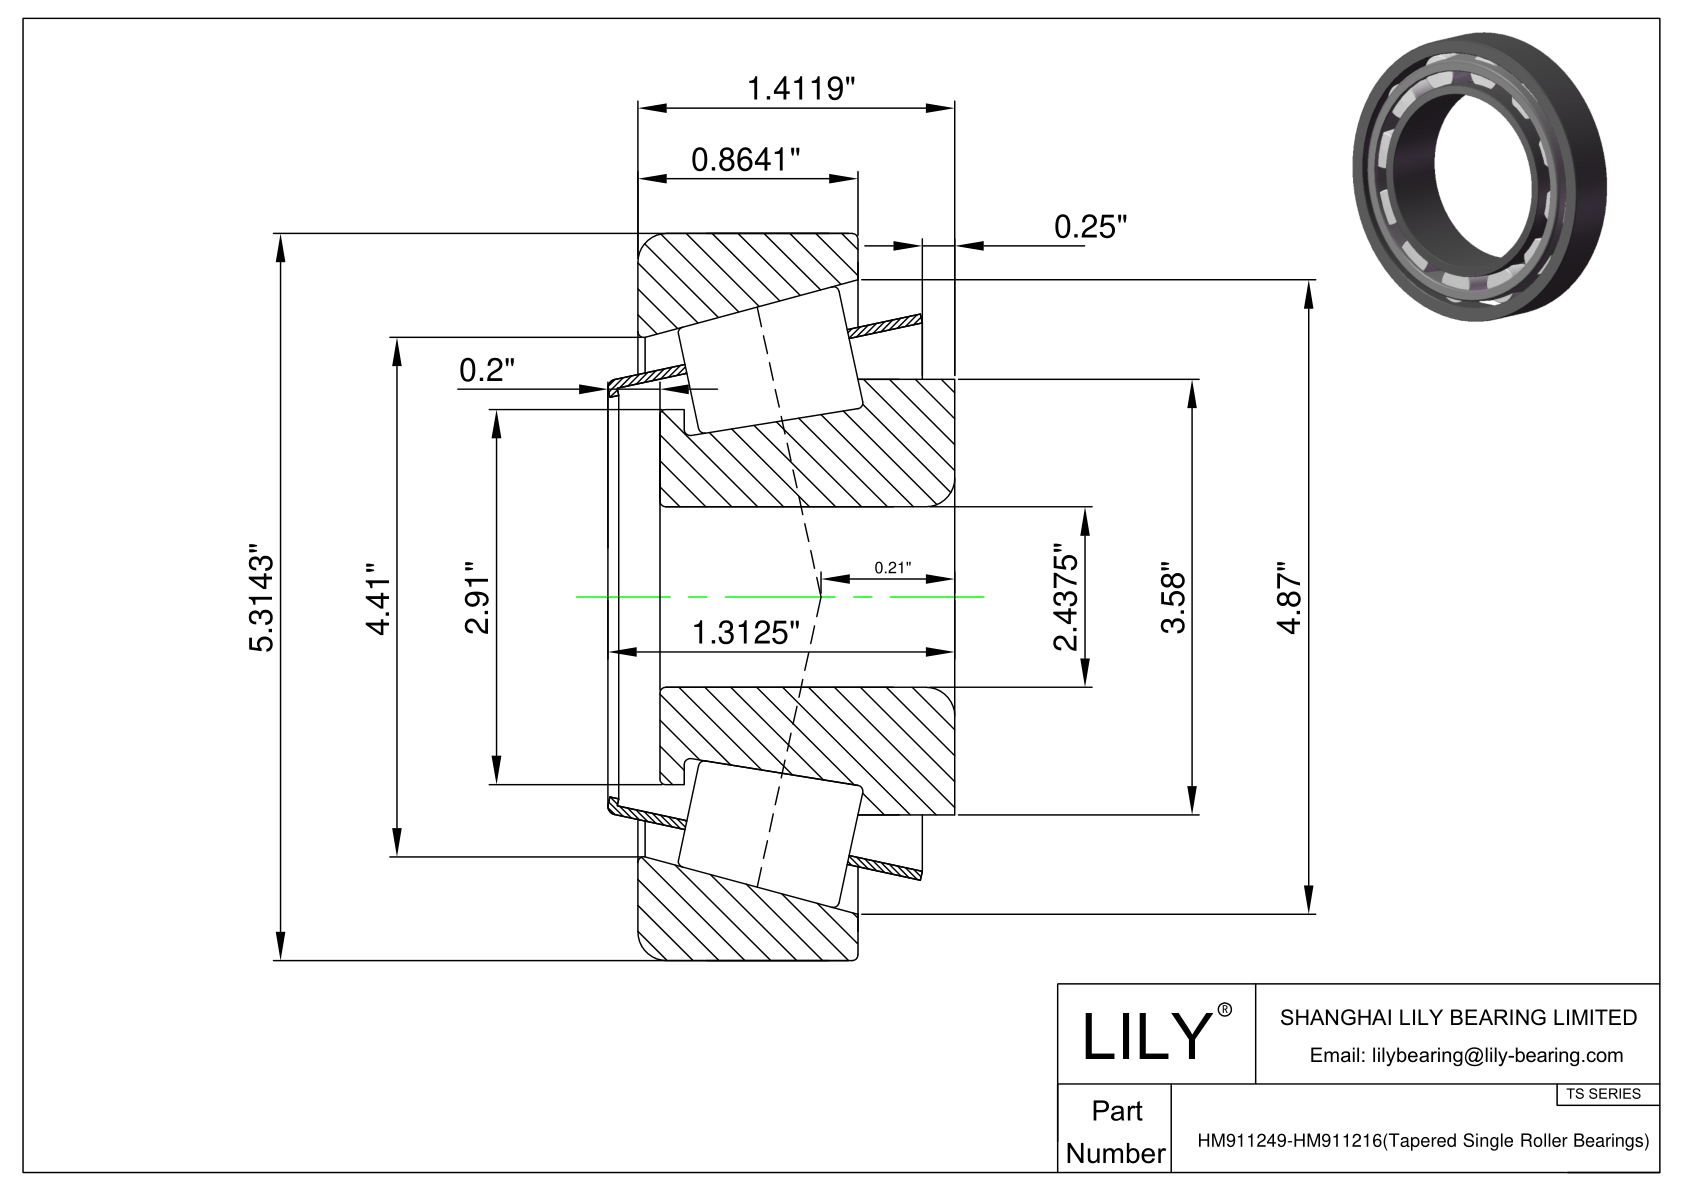 HM911249-HM911216 TS (Tapered Single Roller Bearings) (Imperial) cad drawing